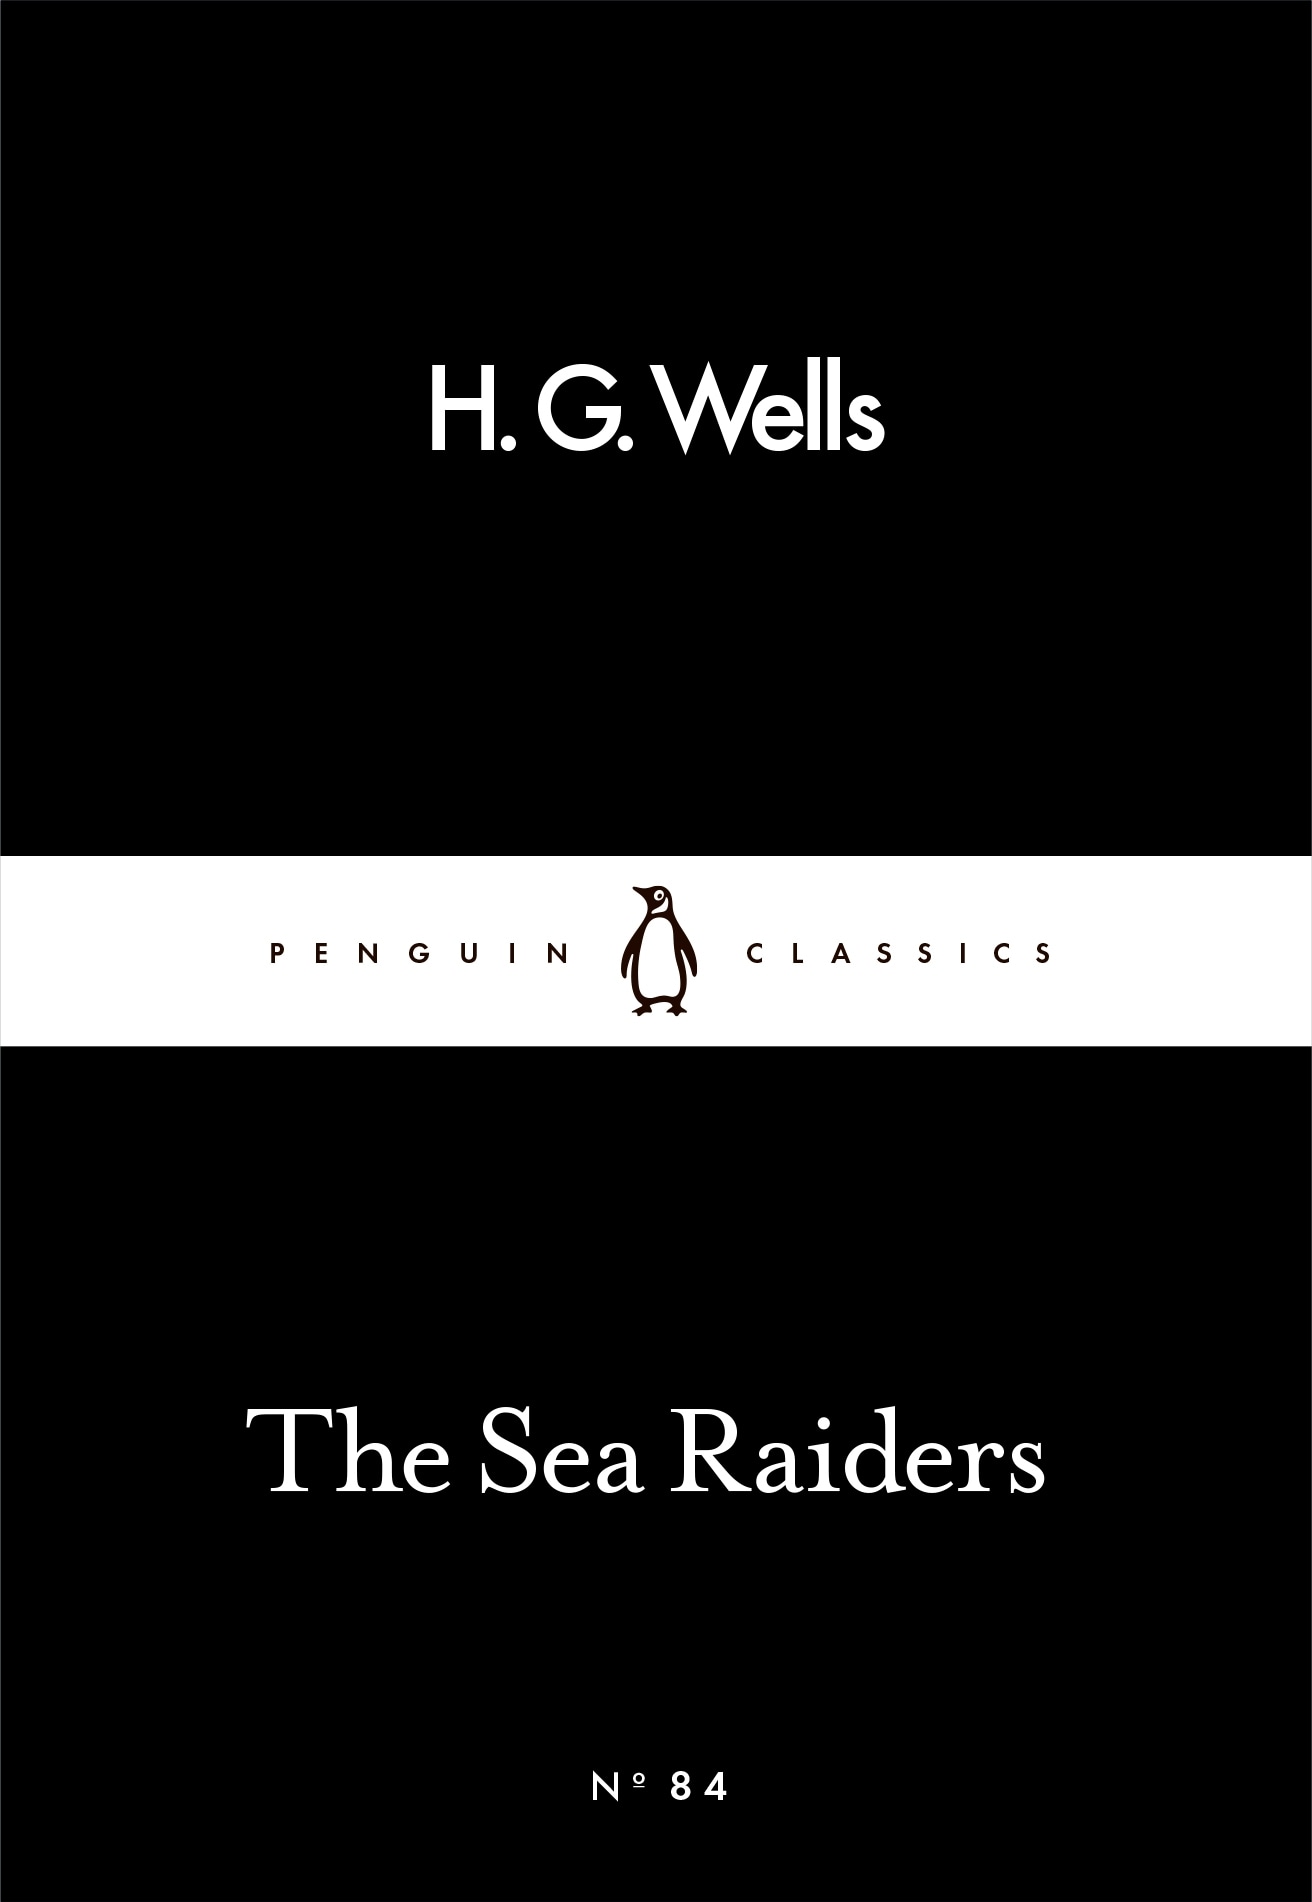 Book “The Sea Raiders” by H G Wells — March 3, 2016